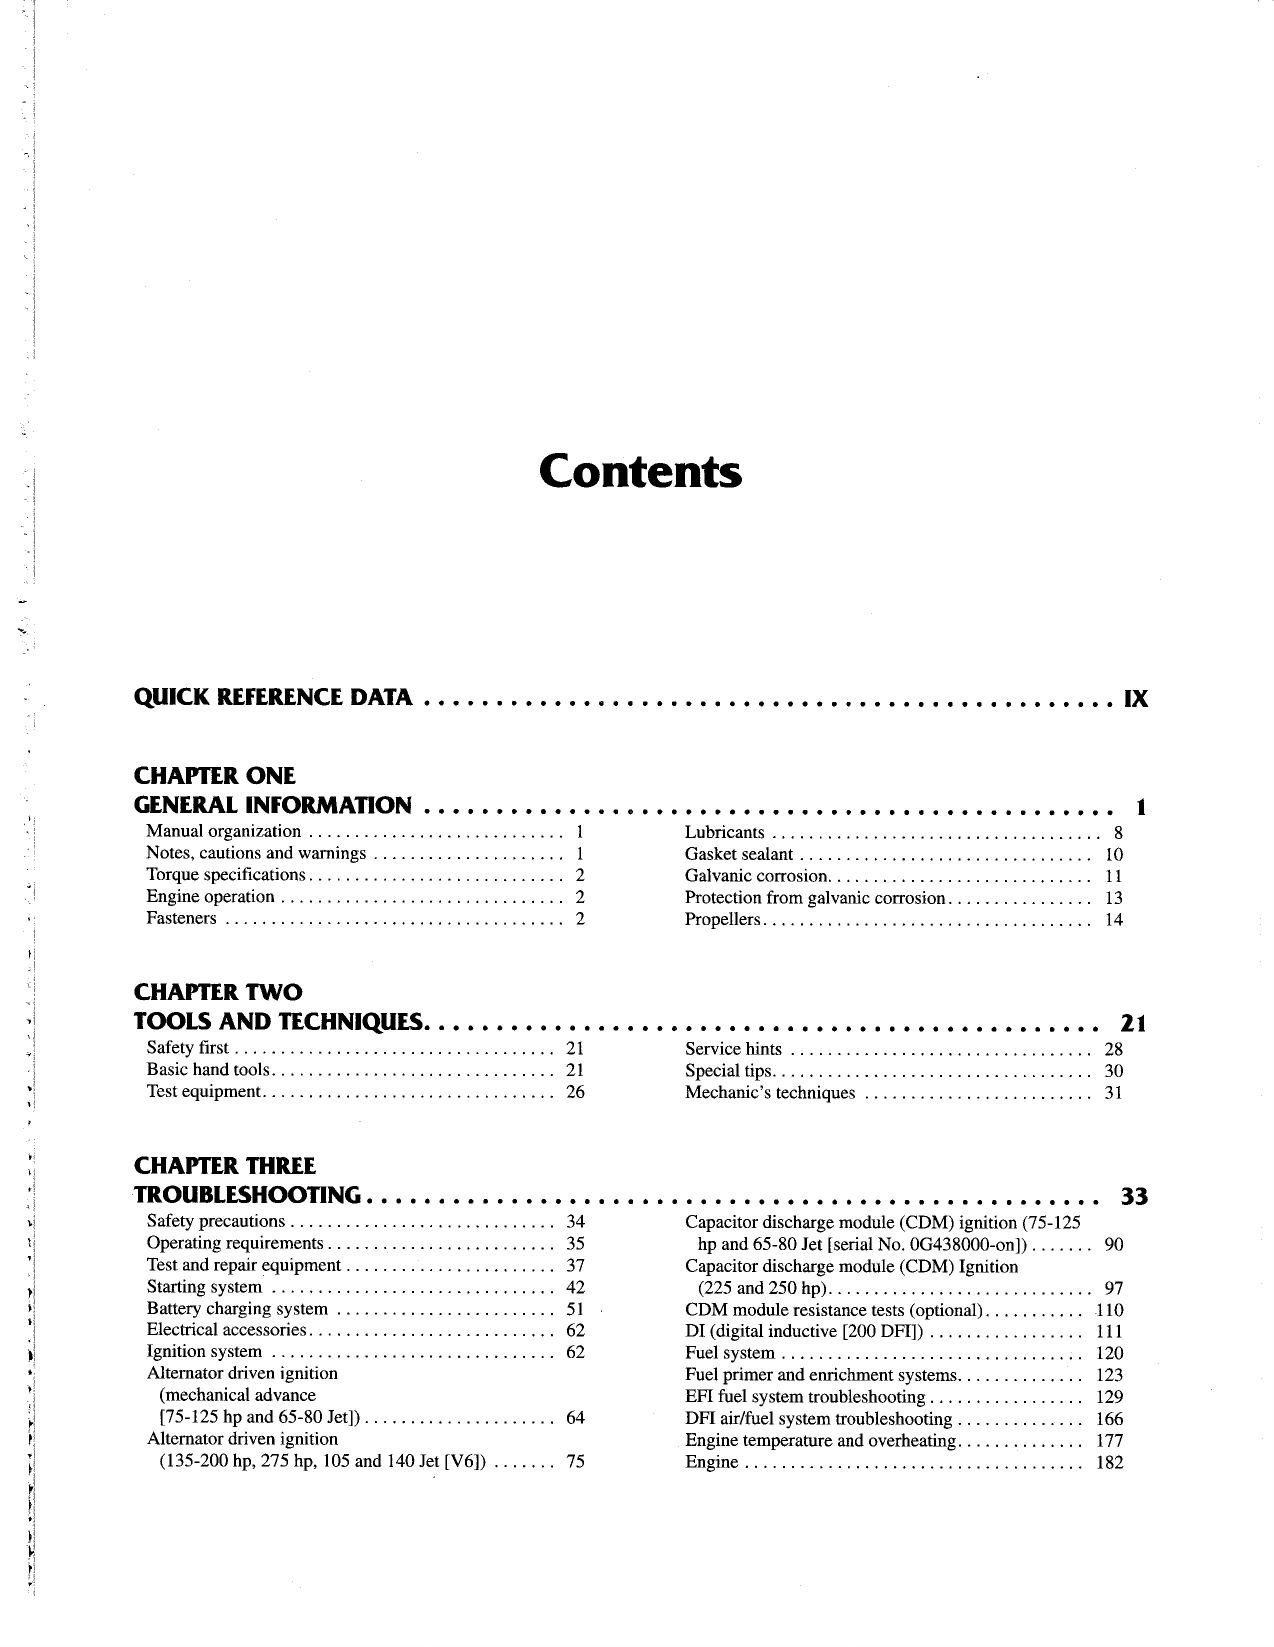 Mercury 100 hp, 125 hp, 135 hp, 140 hp jet outboard motor service manual Preview image 5